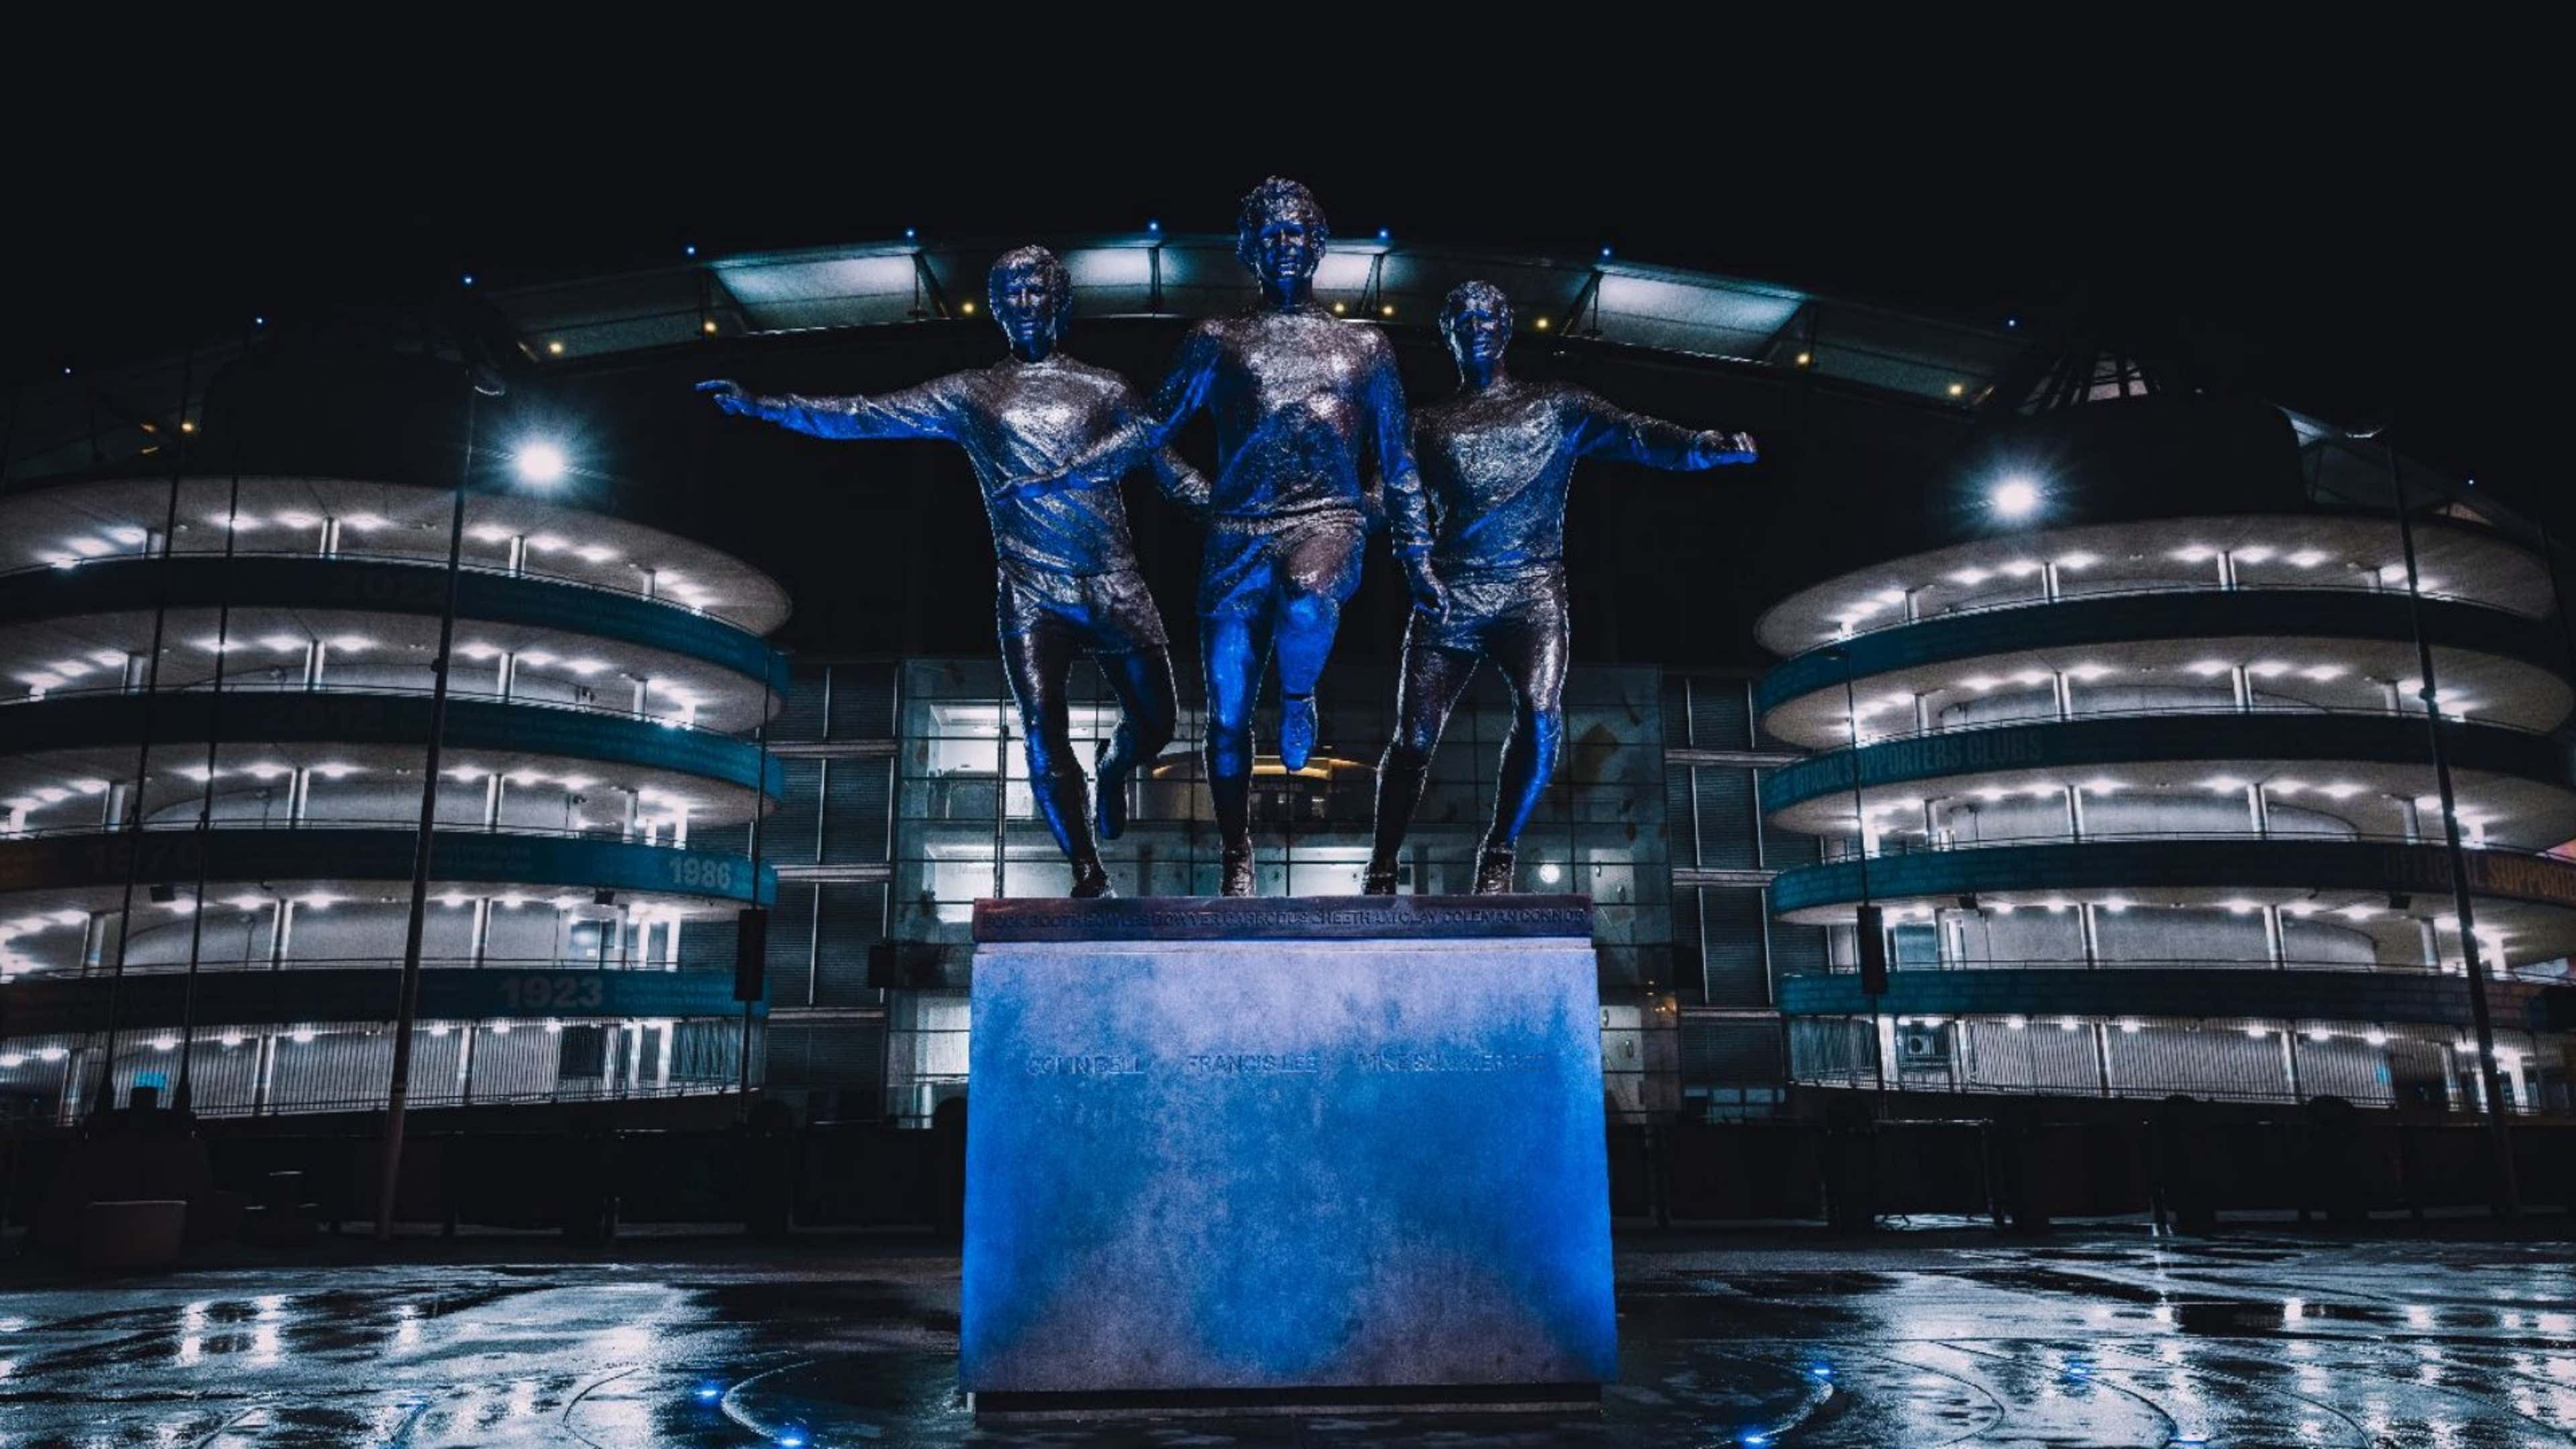 Man City unveil latest statue at Etihad Stadium in tribute to Colin Bell,  Mike Summerbee and Francis Lee as club honours legendary 1960s side